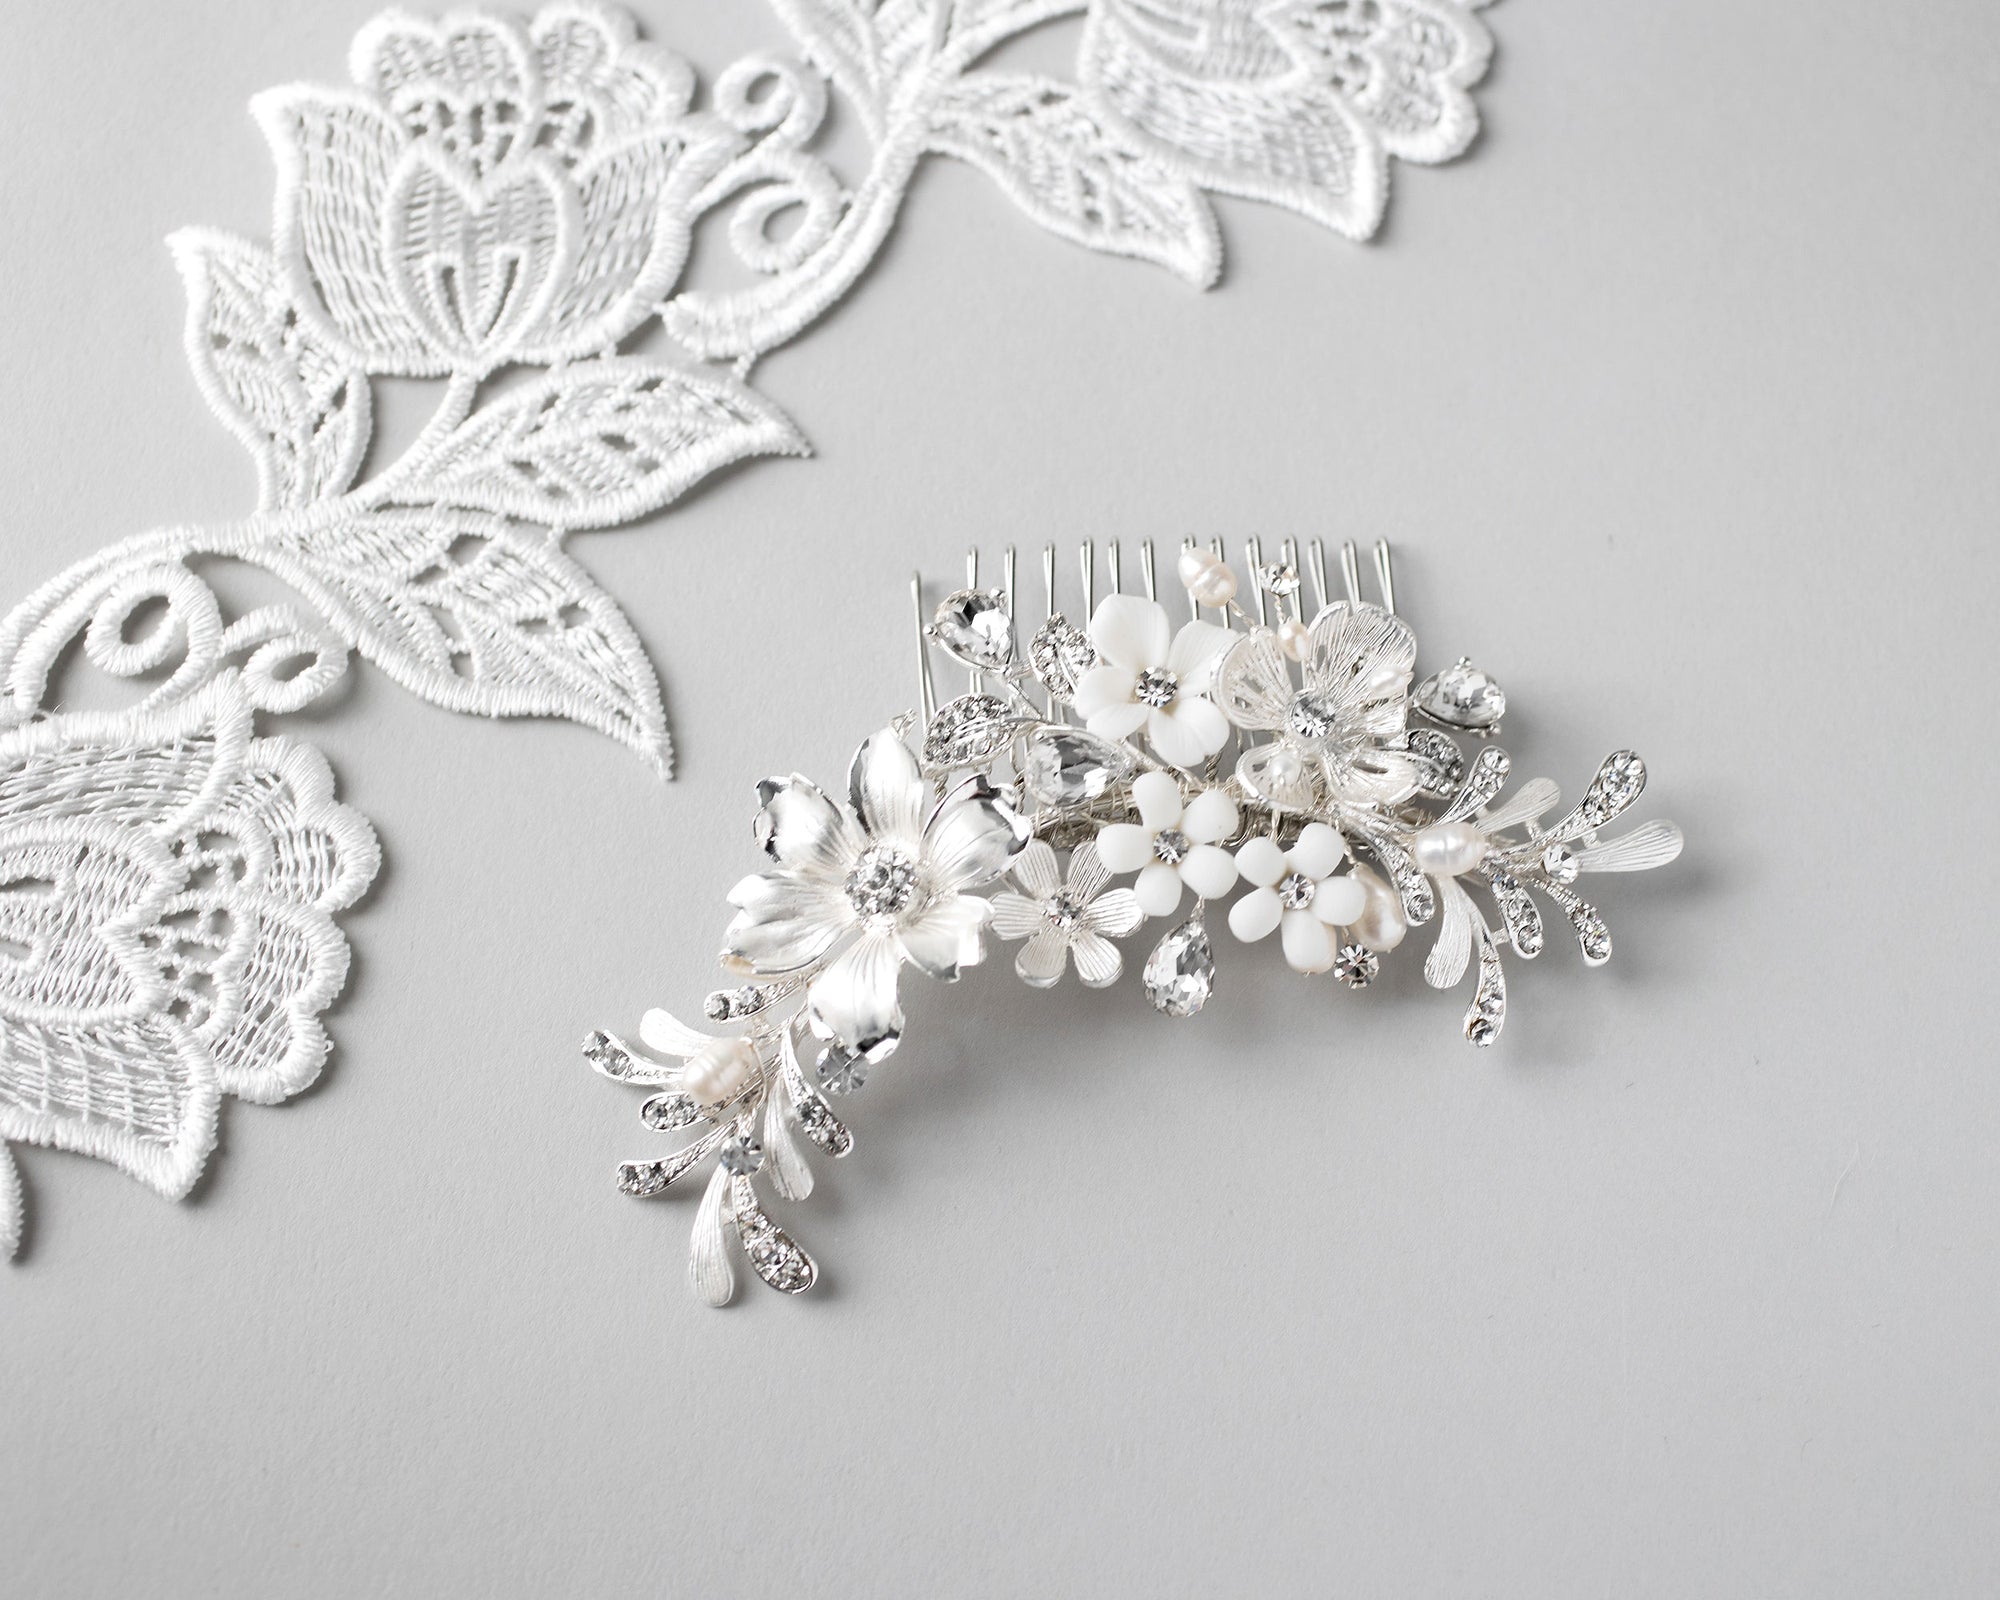 Bridal Hair Comb of Porcelain Flowers and Pearls Cassandra Lynne